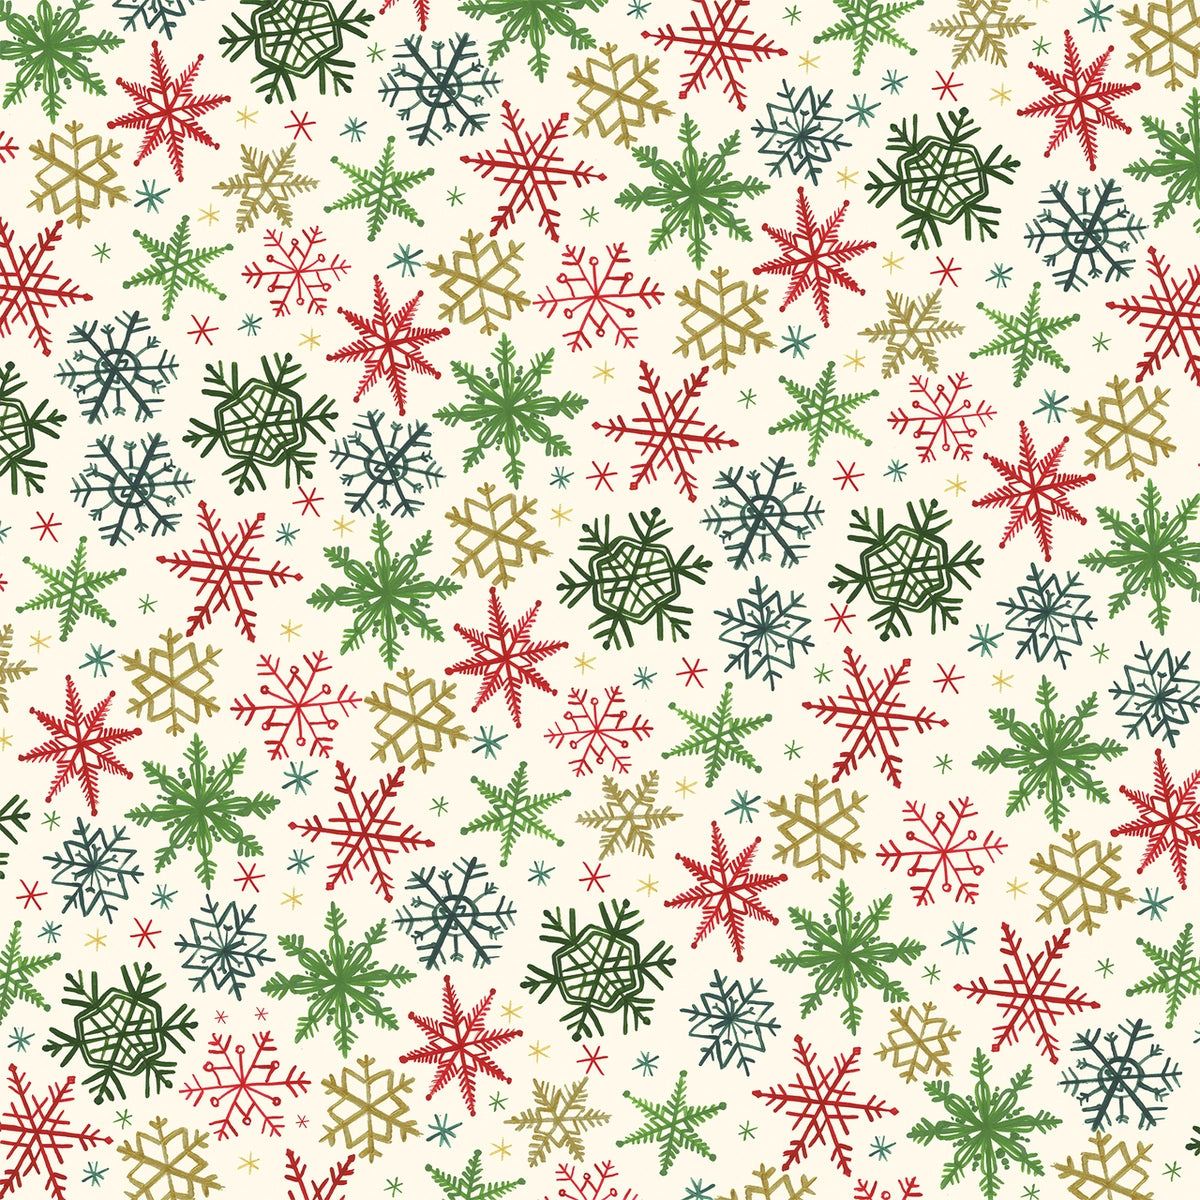 Side B - Red, green, and gold hand-drawn snowflakes on an off-white background